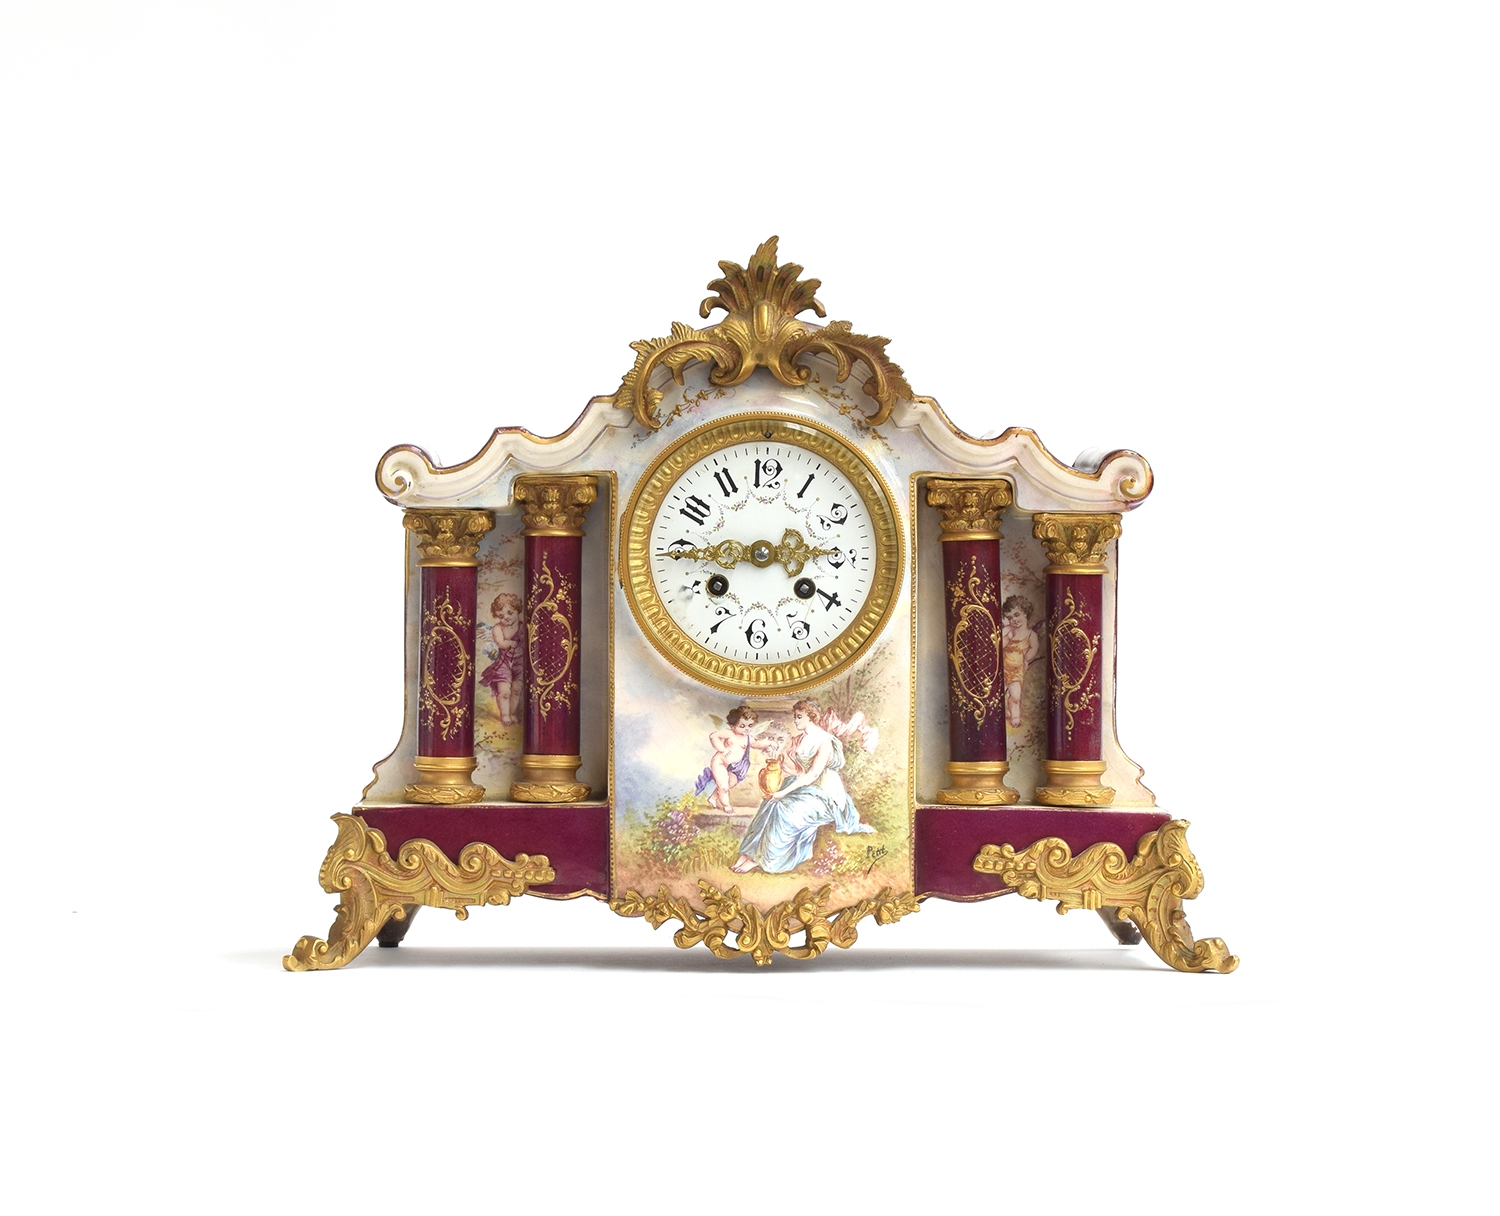 A 19th century French ormolu and porcelain mantel clock, the movement by Japy Freres, striking on